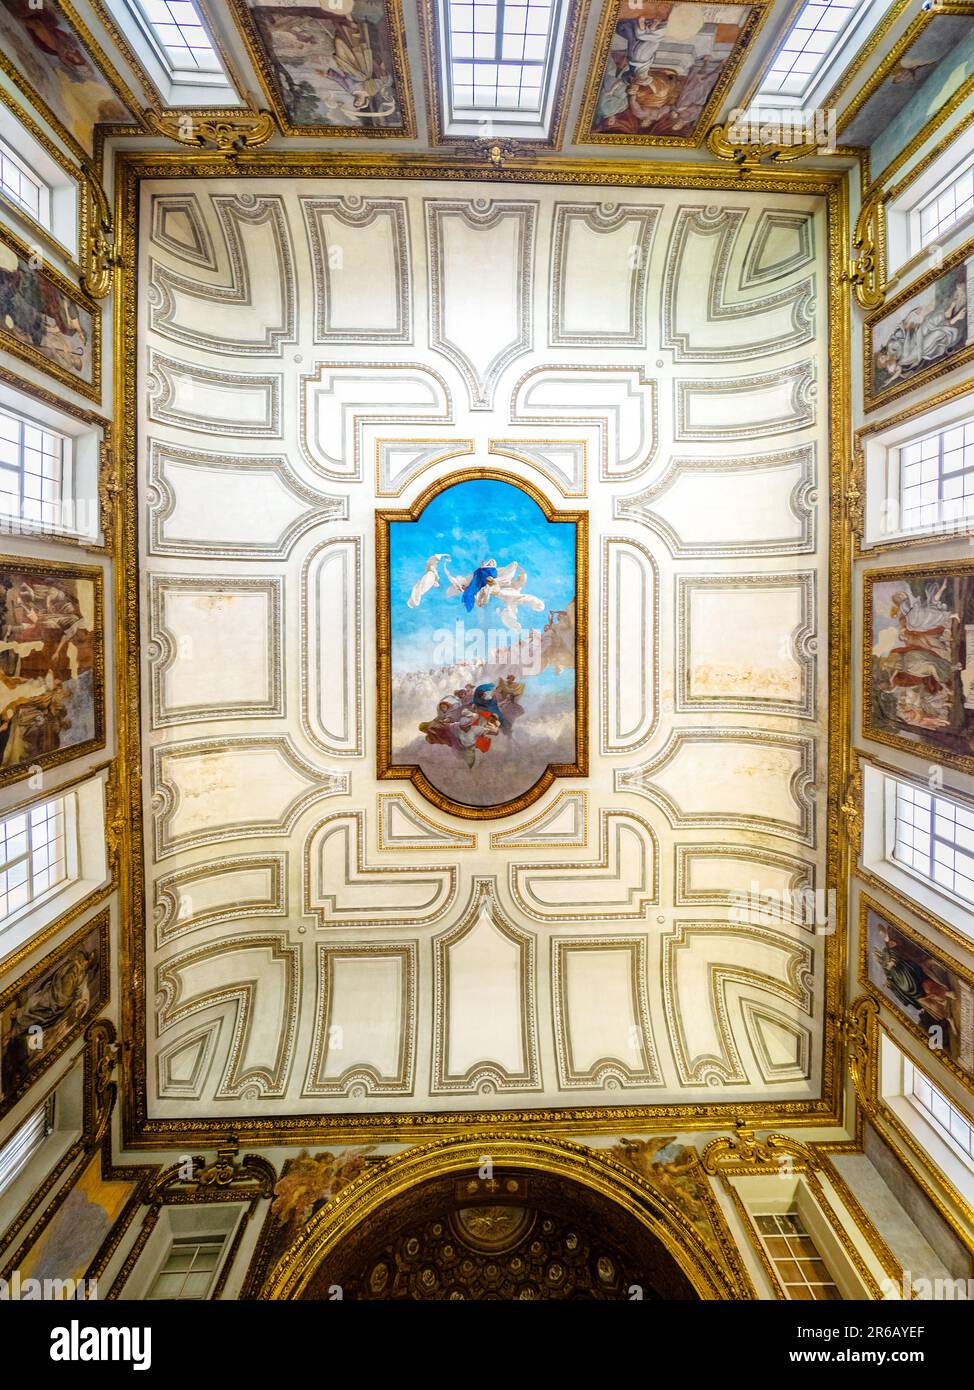 Ceiling of the Royal Chapel, dedicated to Our Lady of Assumption - Royal Palace of Naples that In 1734 became the royal residence of the Bourbons - Naples, Italy Stock Photo